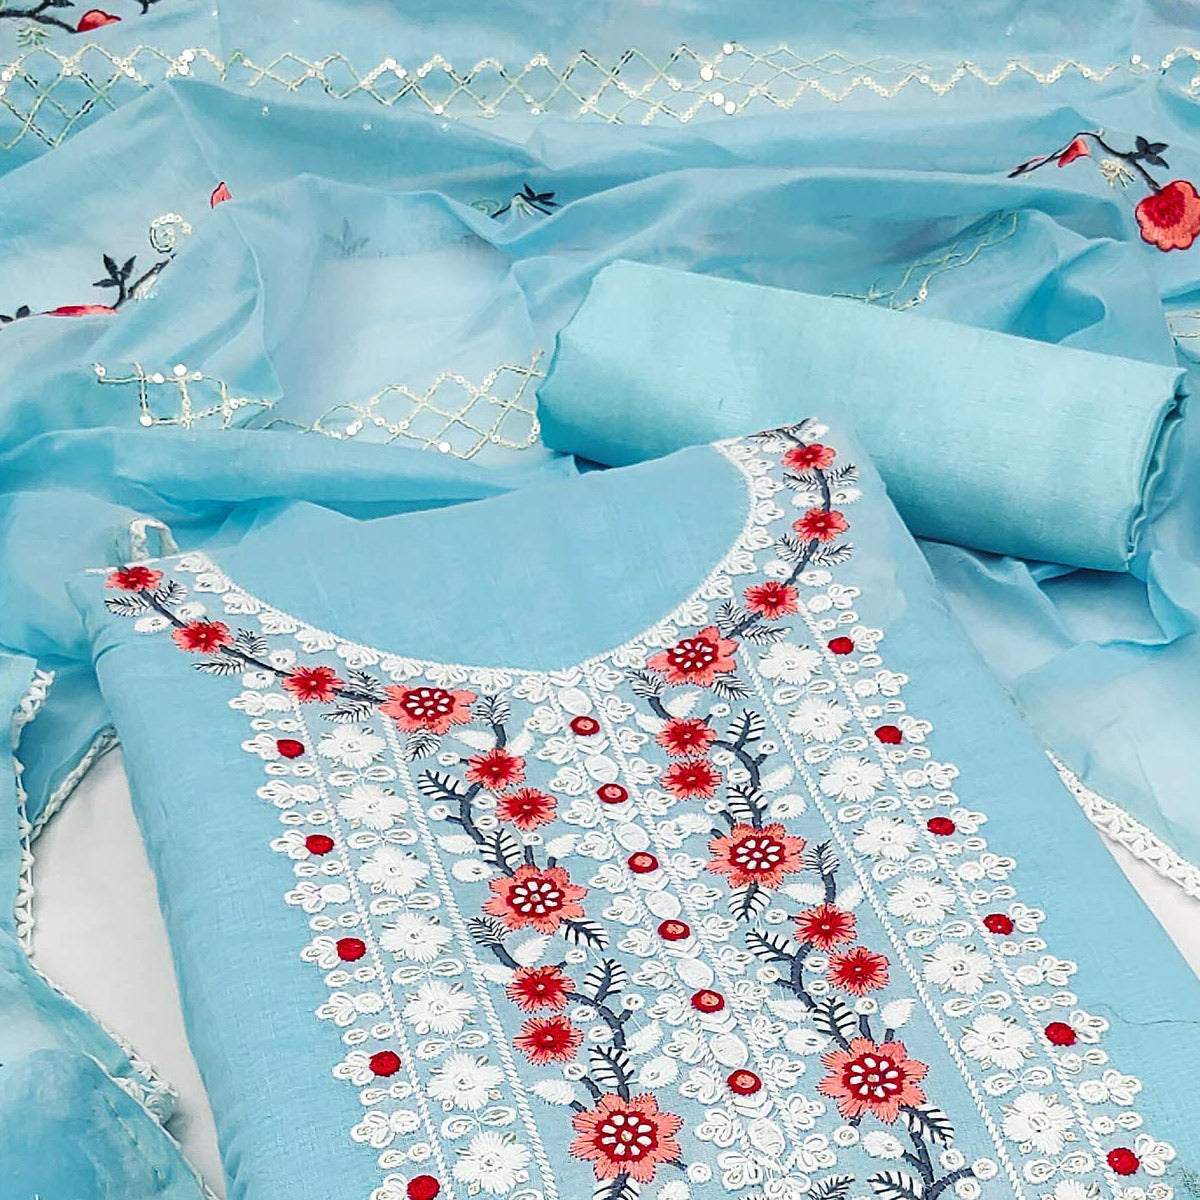 Blue Floral Embroidered Chanderi Dress Material